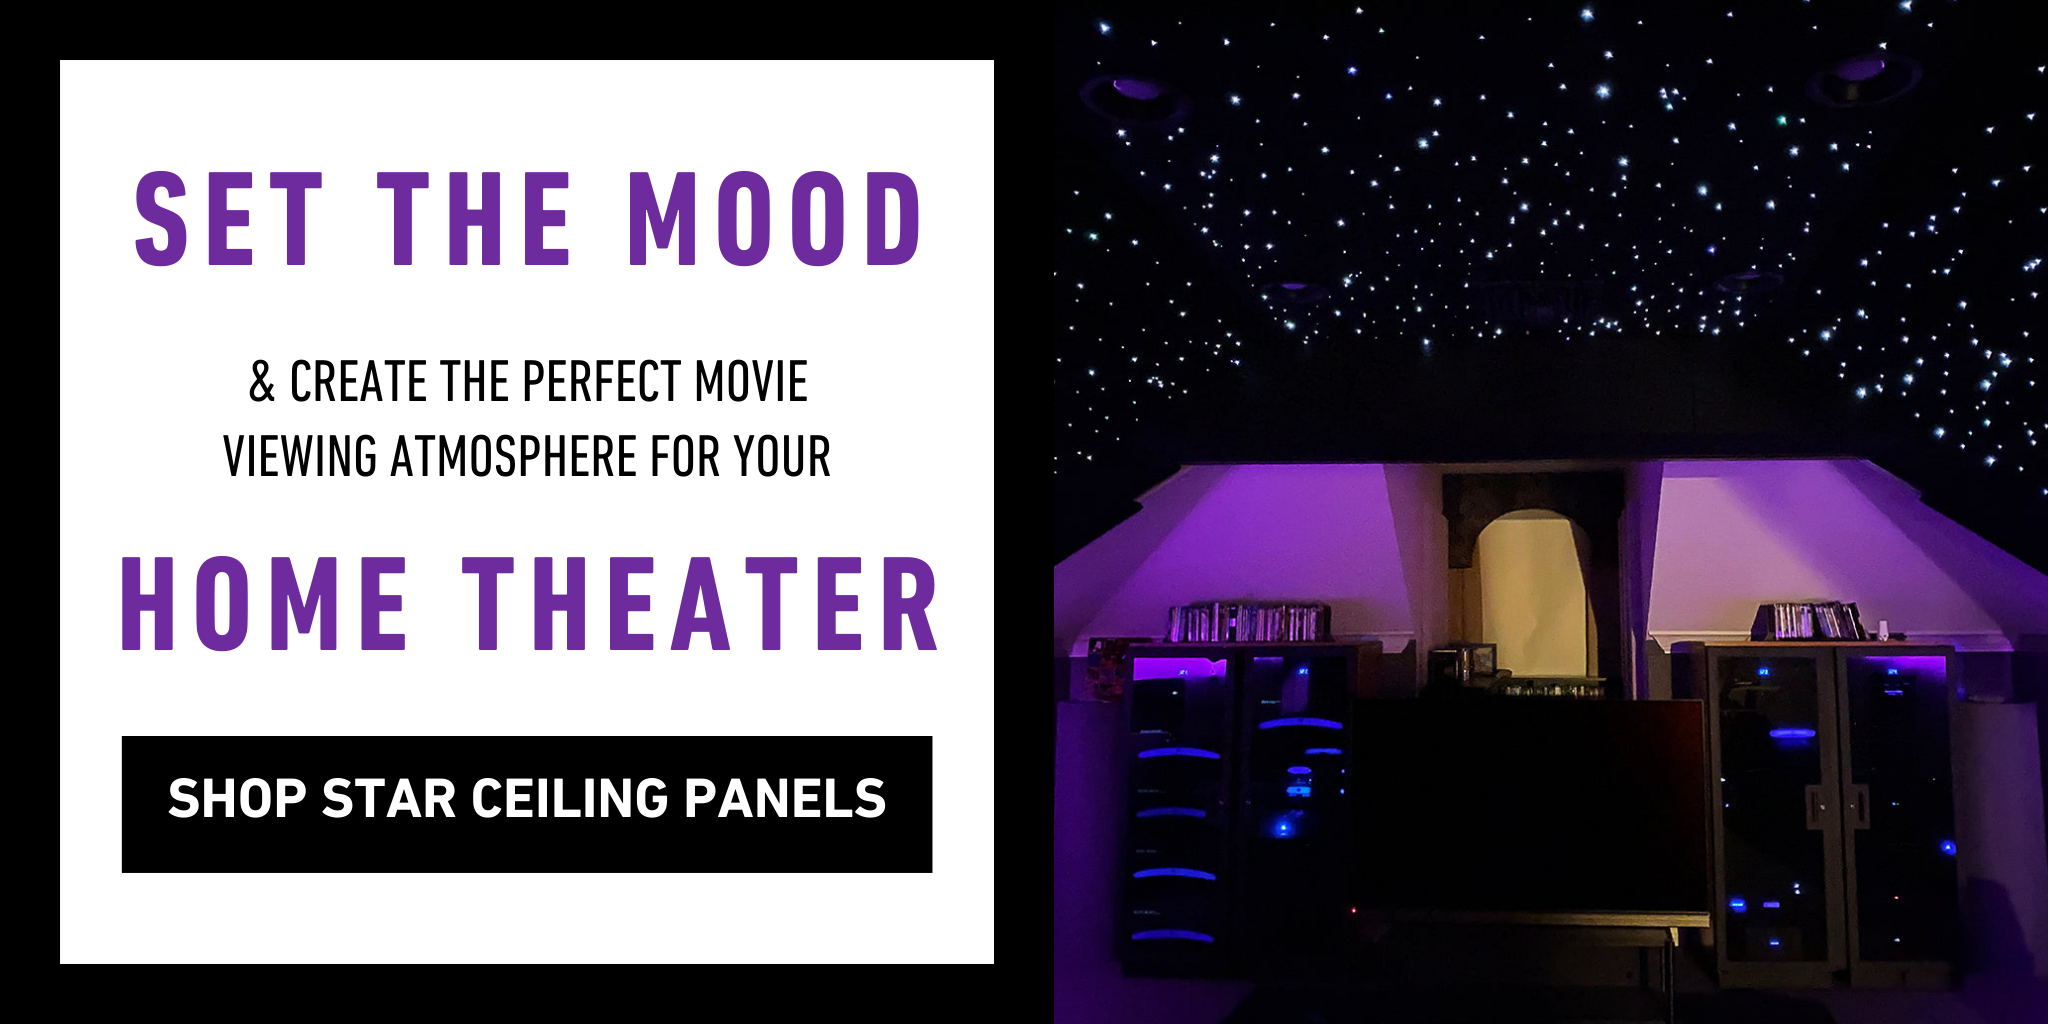 Set the mood & create the perfect movie atmosphere for your home theater| Shop star ceiling panels from Home Theater Mart | Based out of Chicago, Illinois